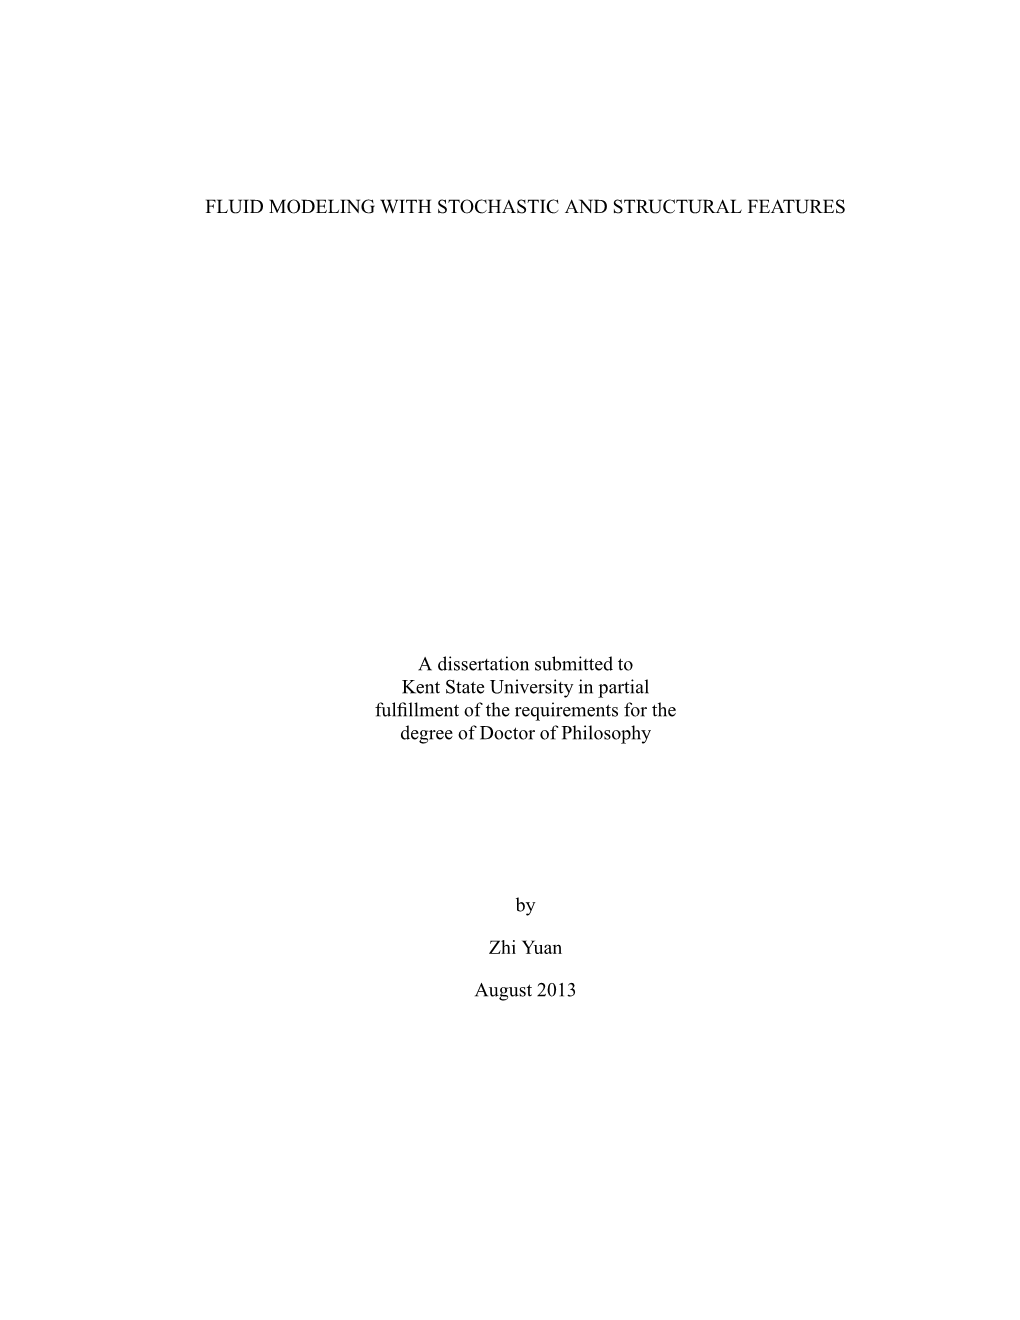 FLUID MODELING with STOCHASTIC and STRUCTURAL FEATURES a Dissertation Submitted to Kent State University in Partial Fulfillment